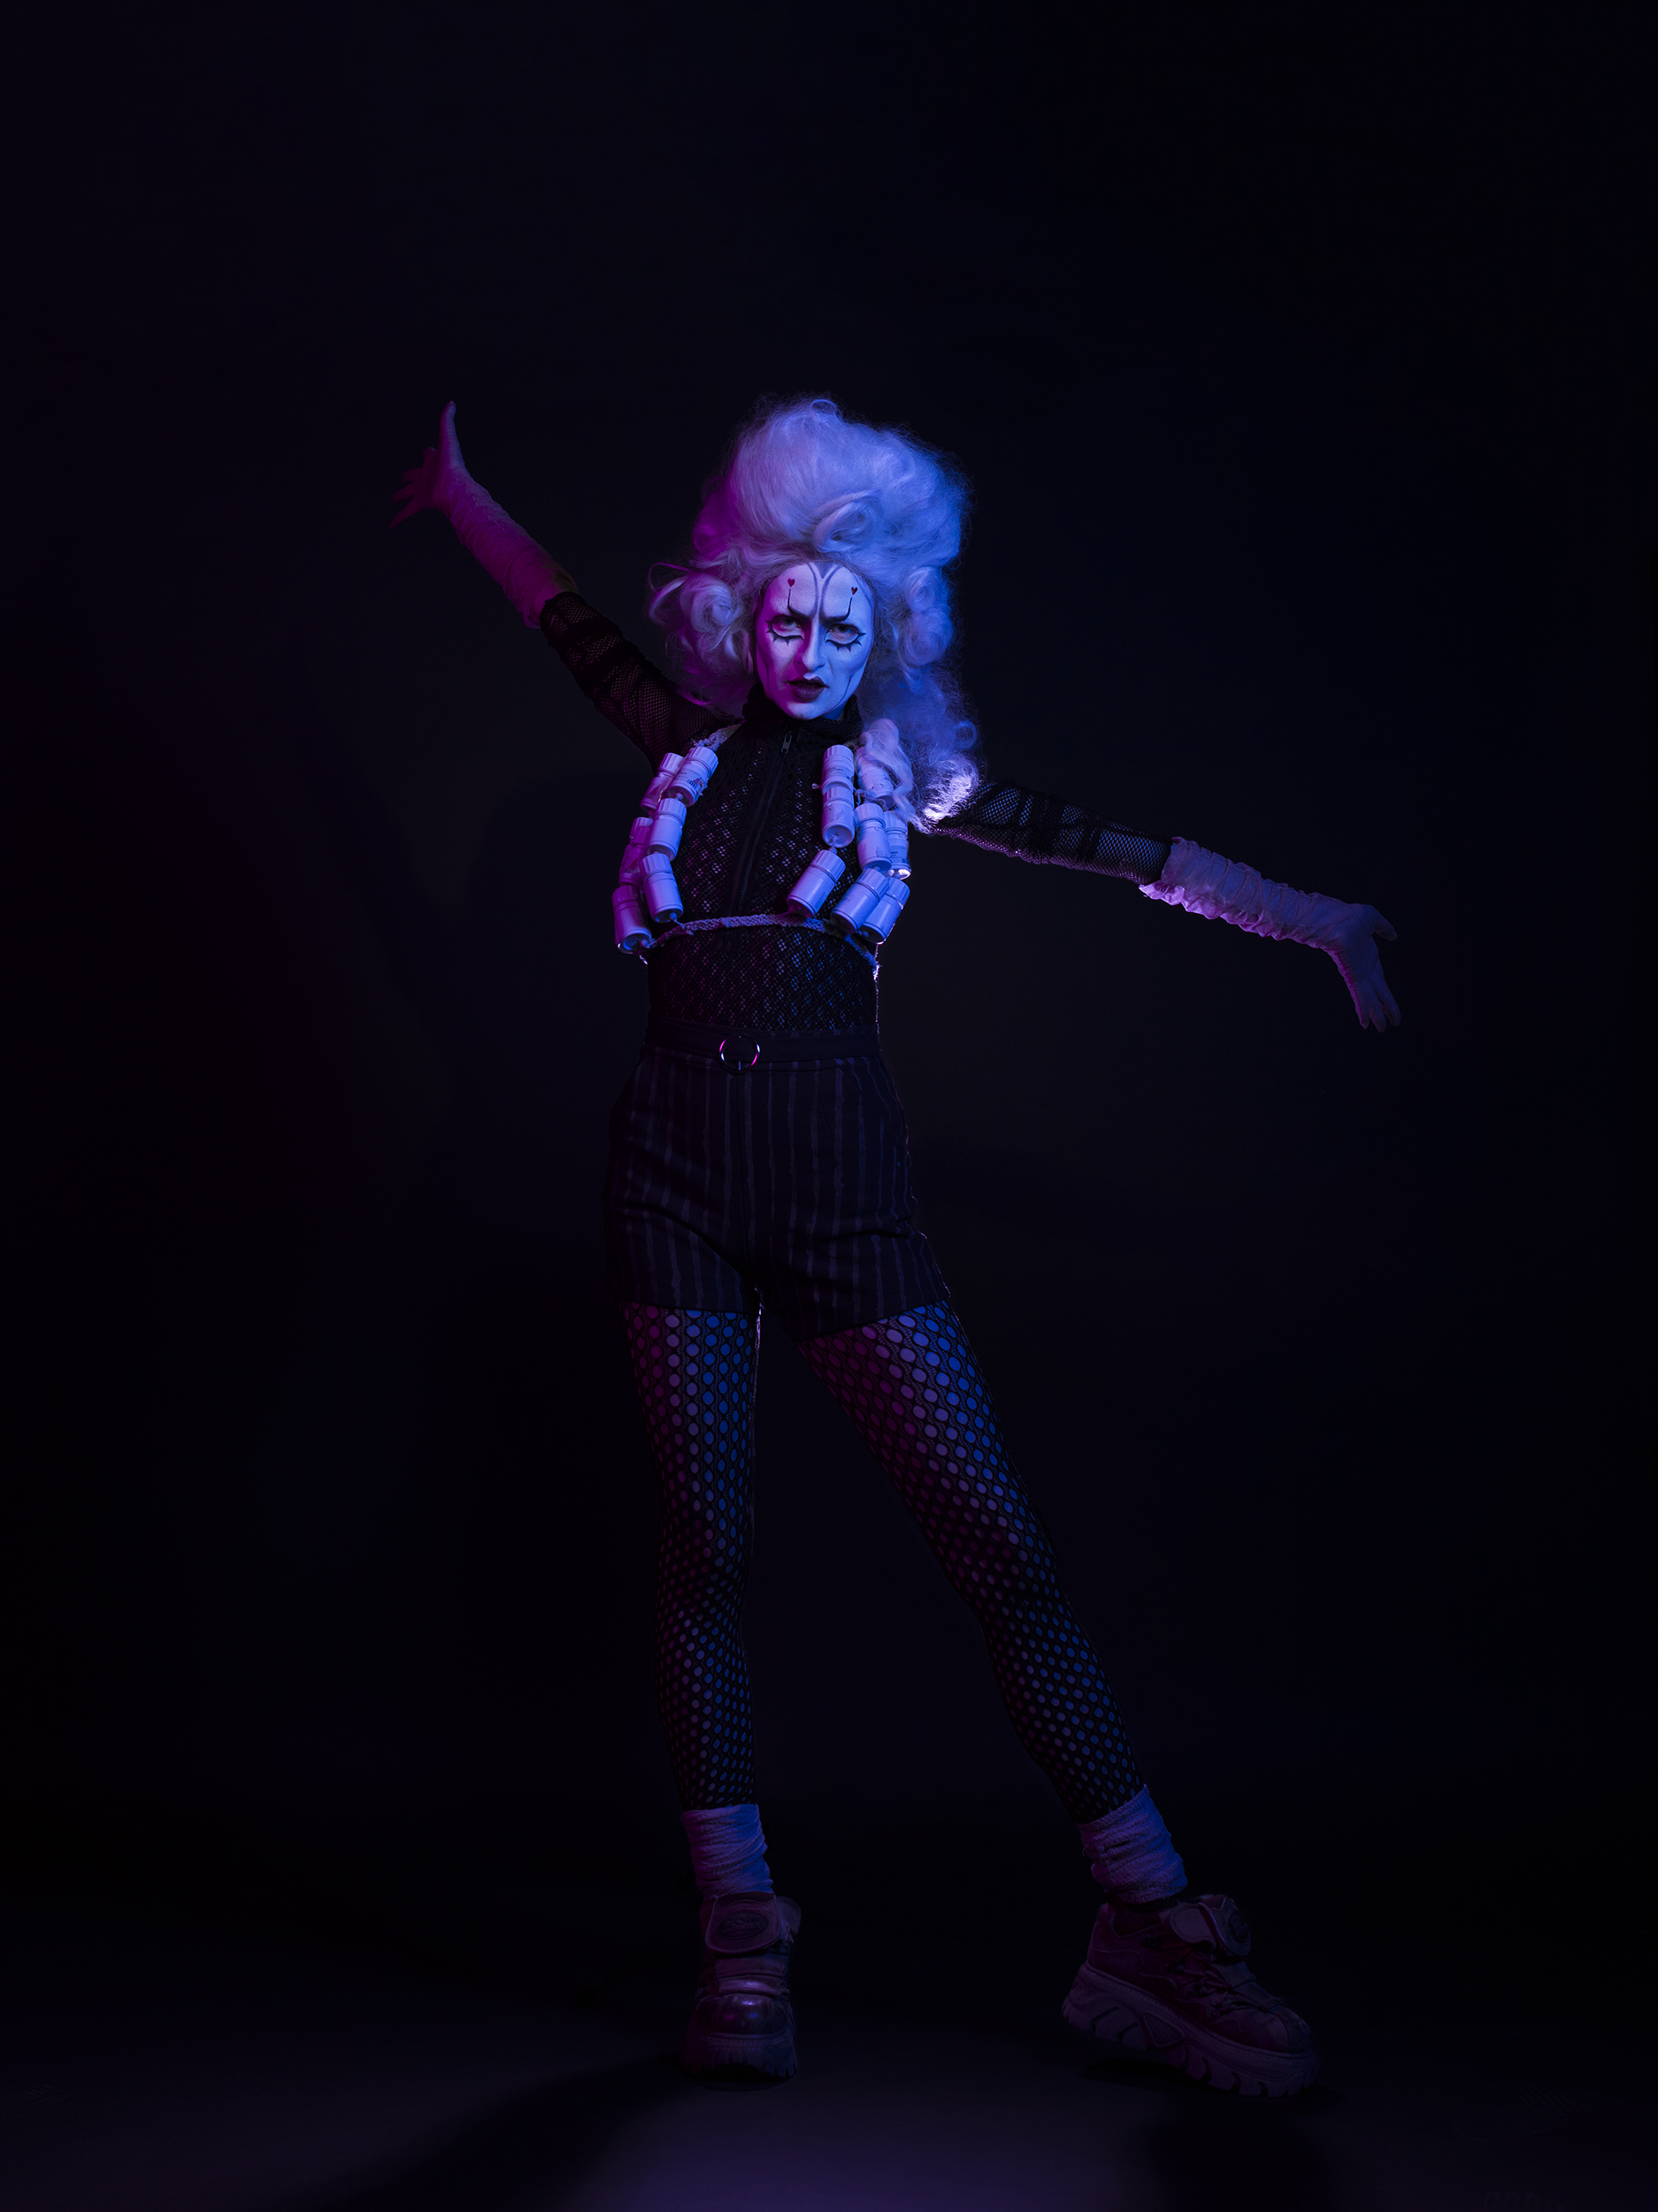 BA Photography work by Micha Hollis showing a portrait of drag artist Discount Dandy. The lighting is multi-coloured with pink on the left and blue on the right.